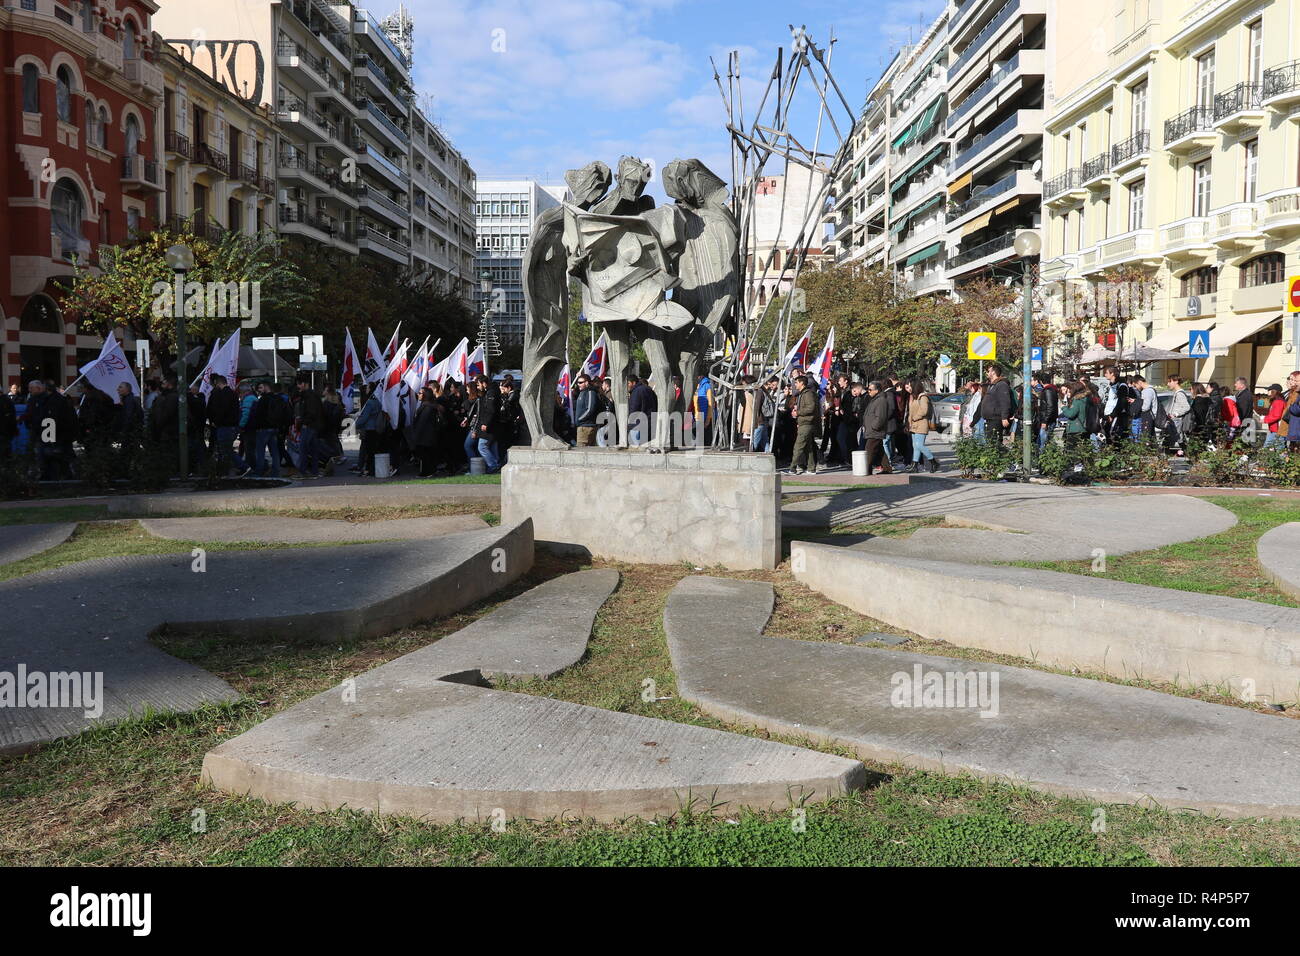 Thessaloniki, Greece, 28th November, 2018. Protesters from the communist-affiliated trade union PAME walk past a statue during a 24-hour walkout staged by Greece's largest private sector union GSEE  against planned pension cuts and to demand the reversal of labour reforms implemented under the country's third bailout. The strike by the GSEE union is the second major strike since Greece exited its bailout programm in August. Credit : Orhan Tsolak / Alamy Live News. Stock Photo